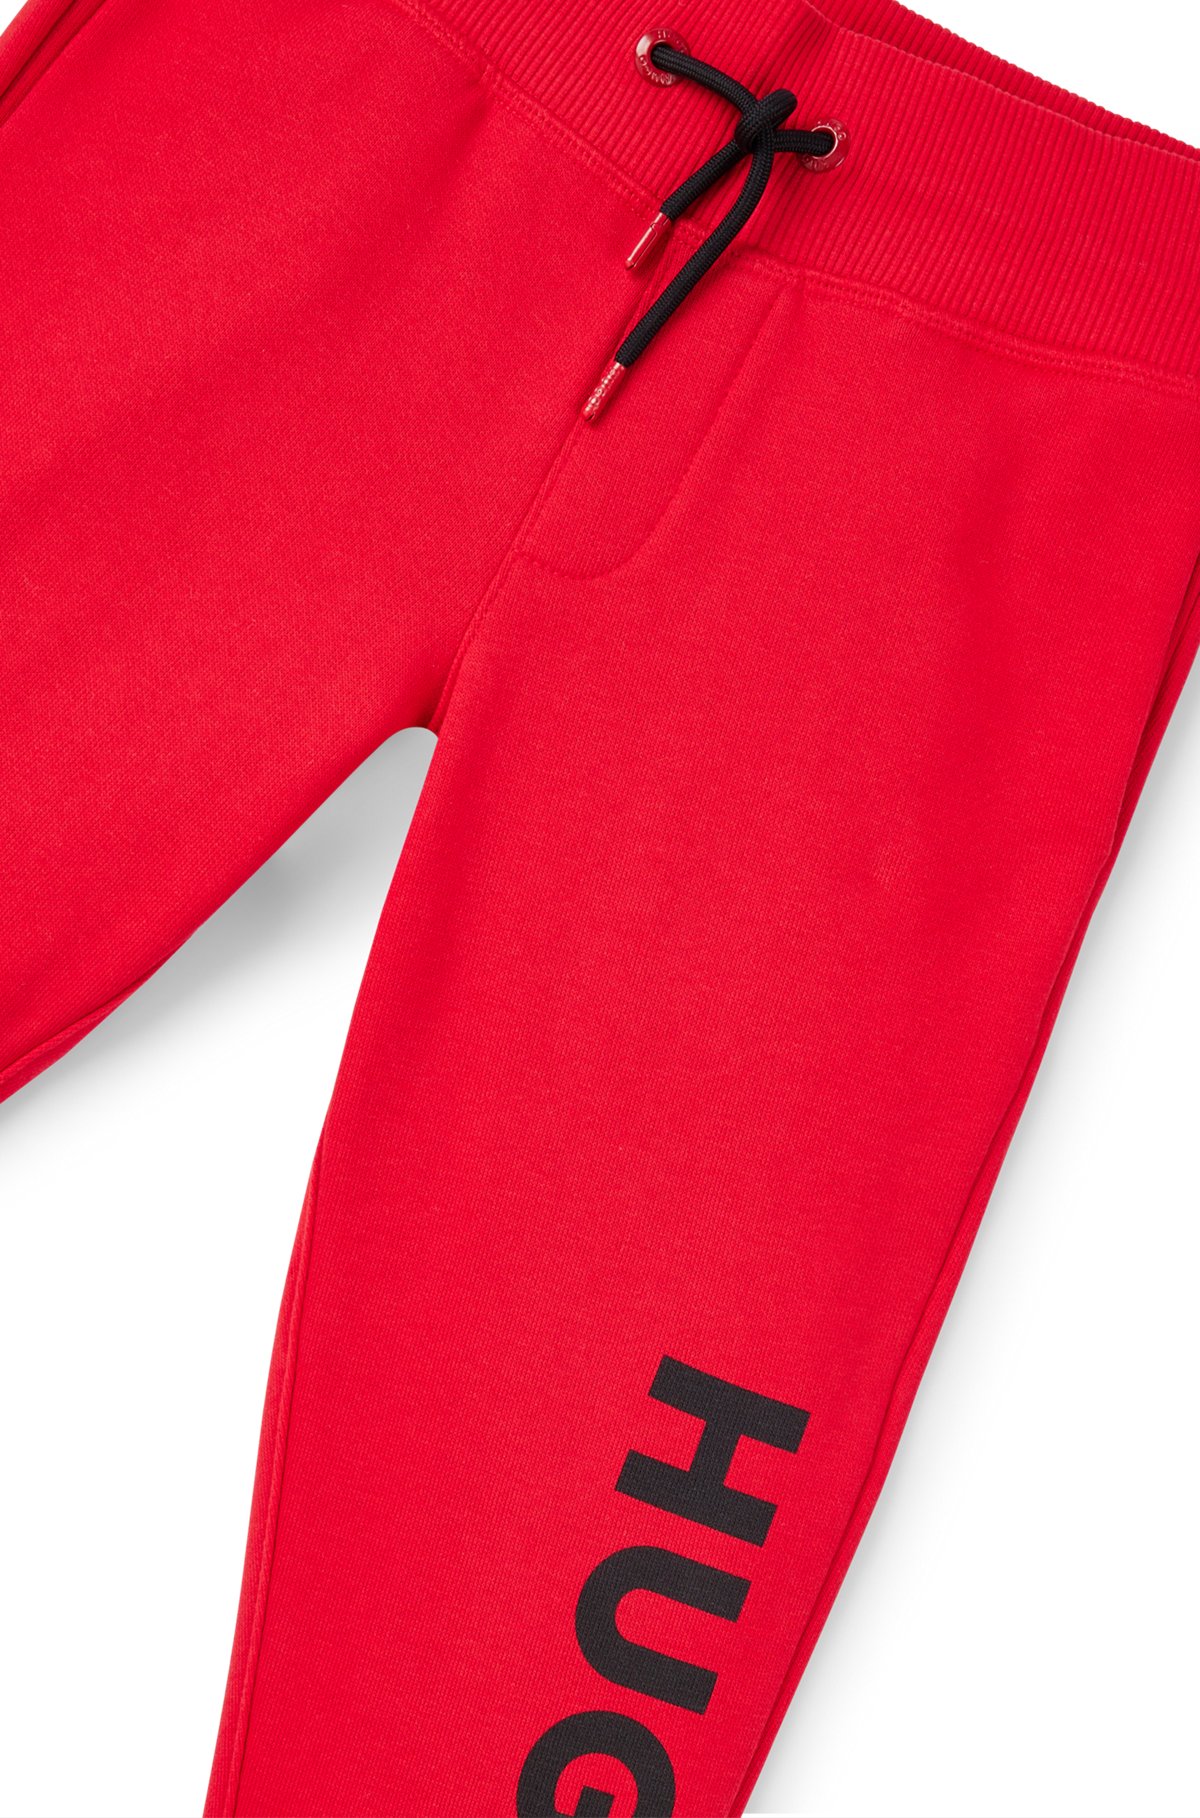 Kids' fleece tracksuit bottoms with vertical logo, Red